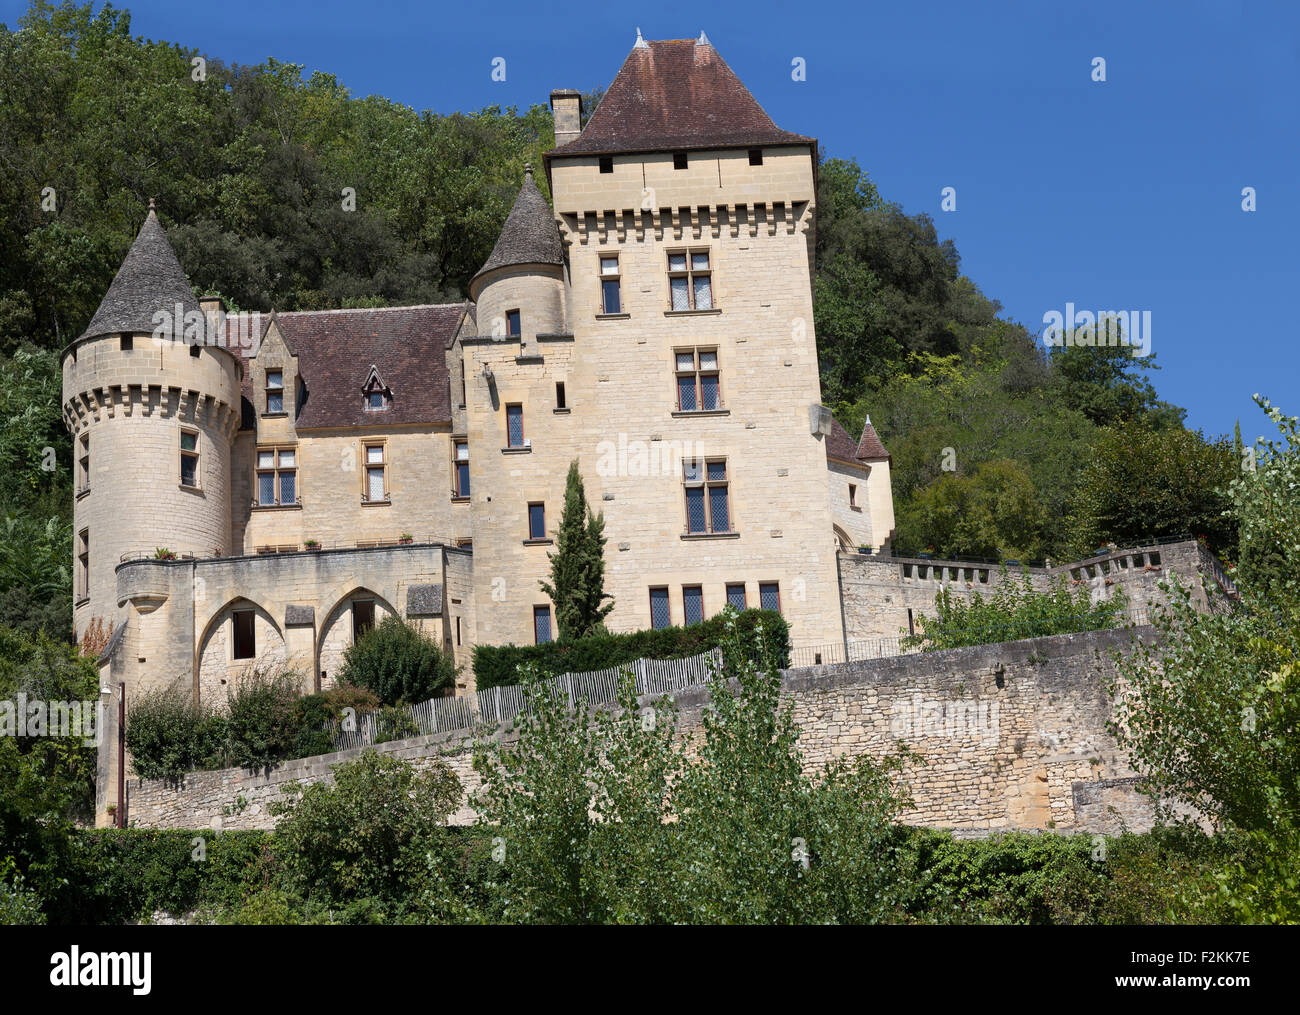 The 'la Malartrie' castle, in the heart of Perigord, overlooks 'la Roque Gageac', one of the most beautiful villages of France. Stock Photo